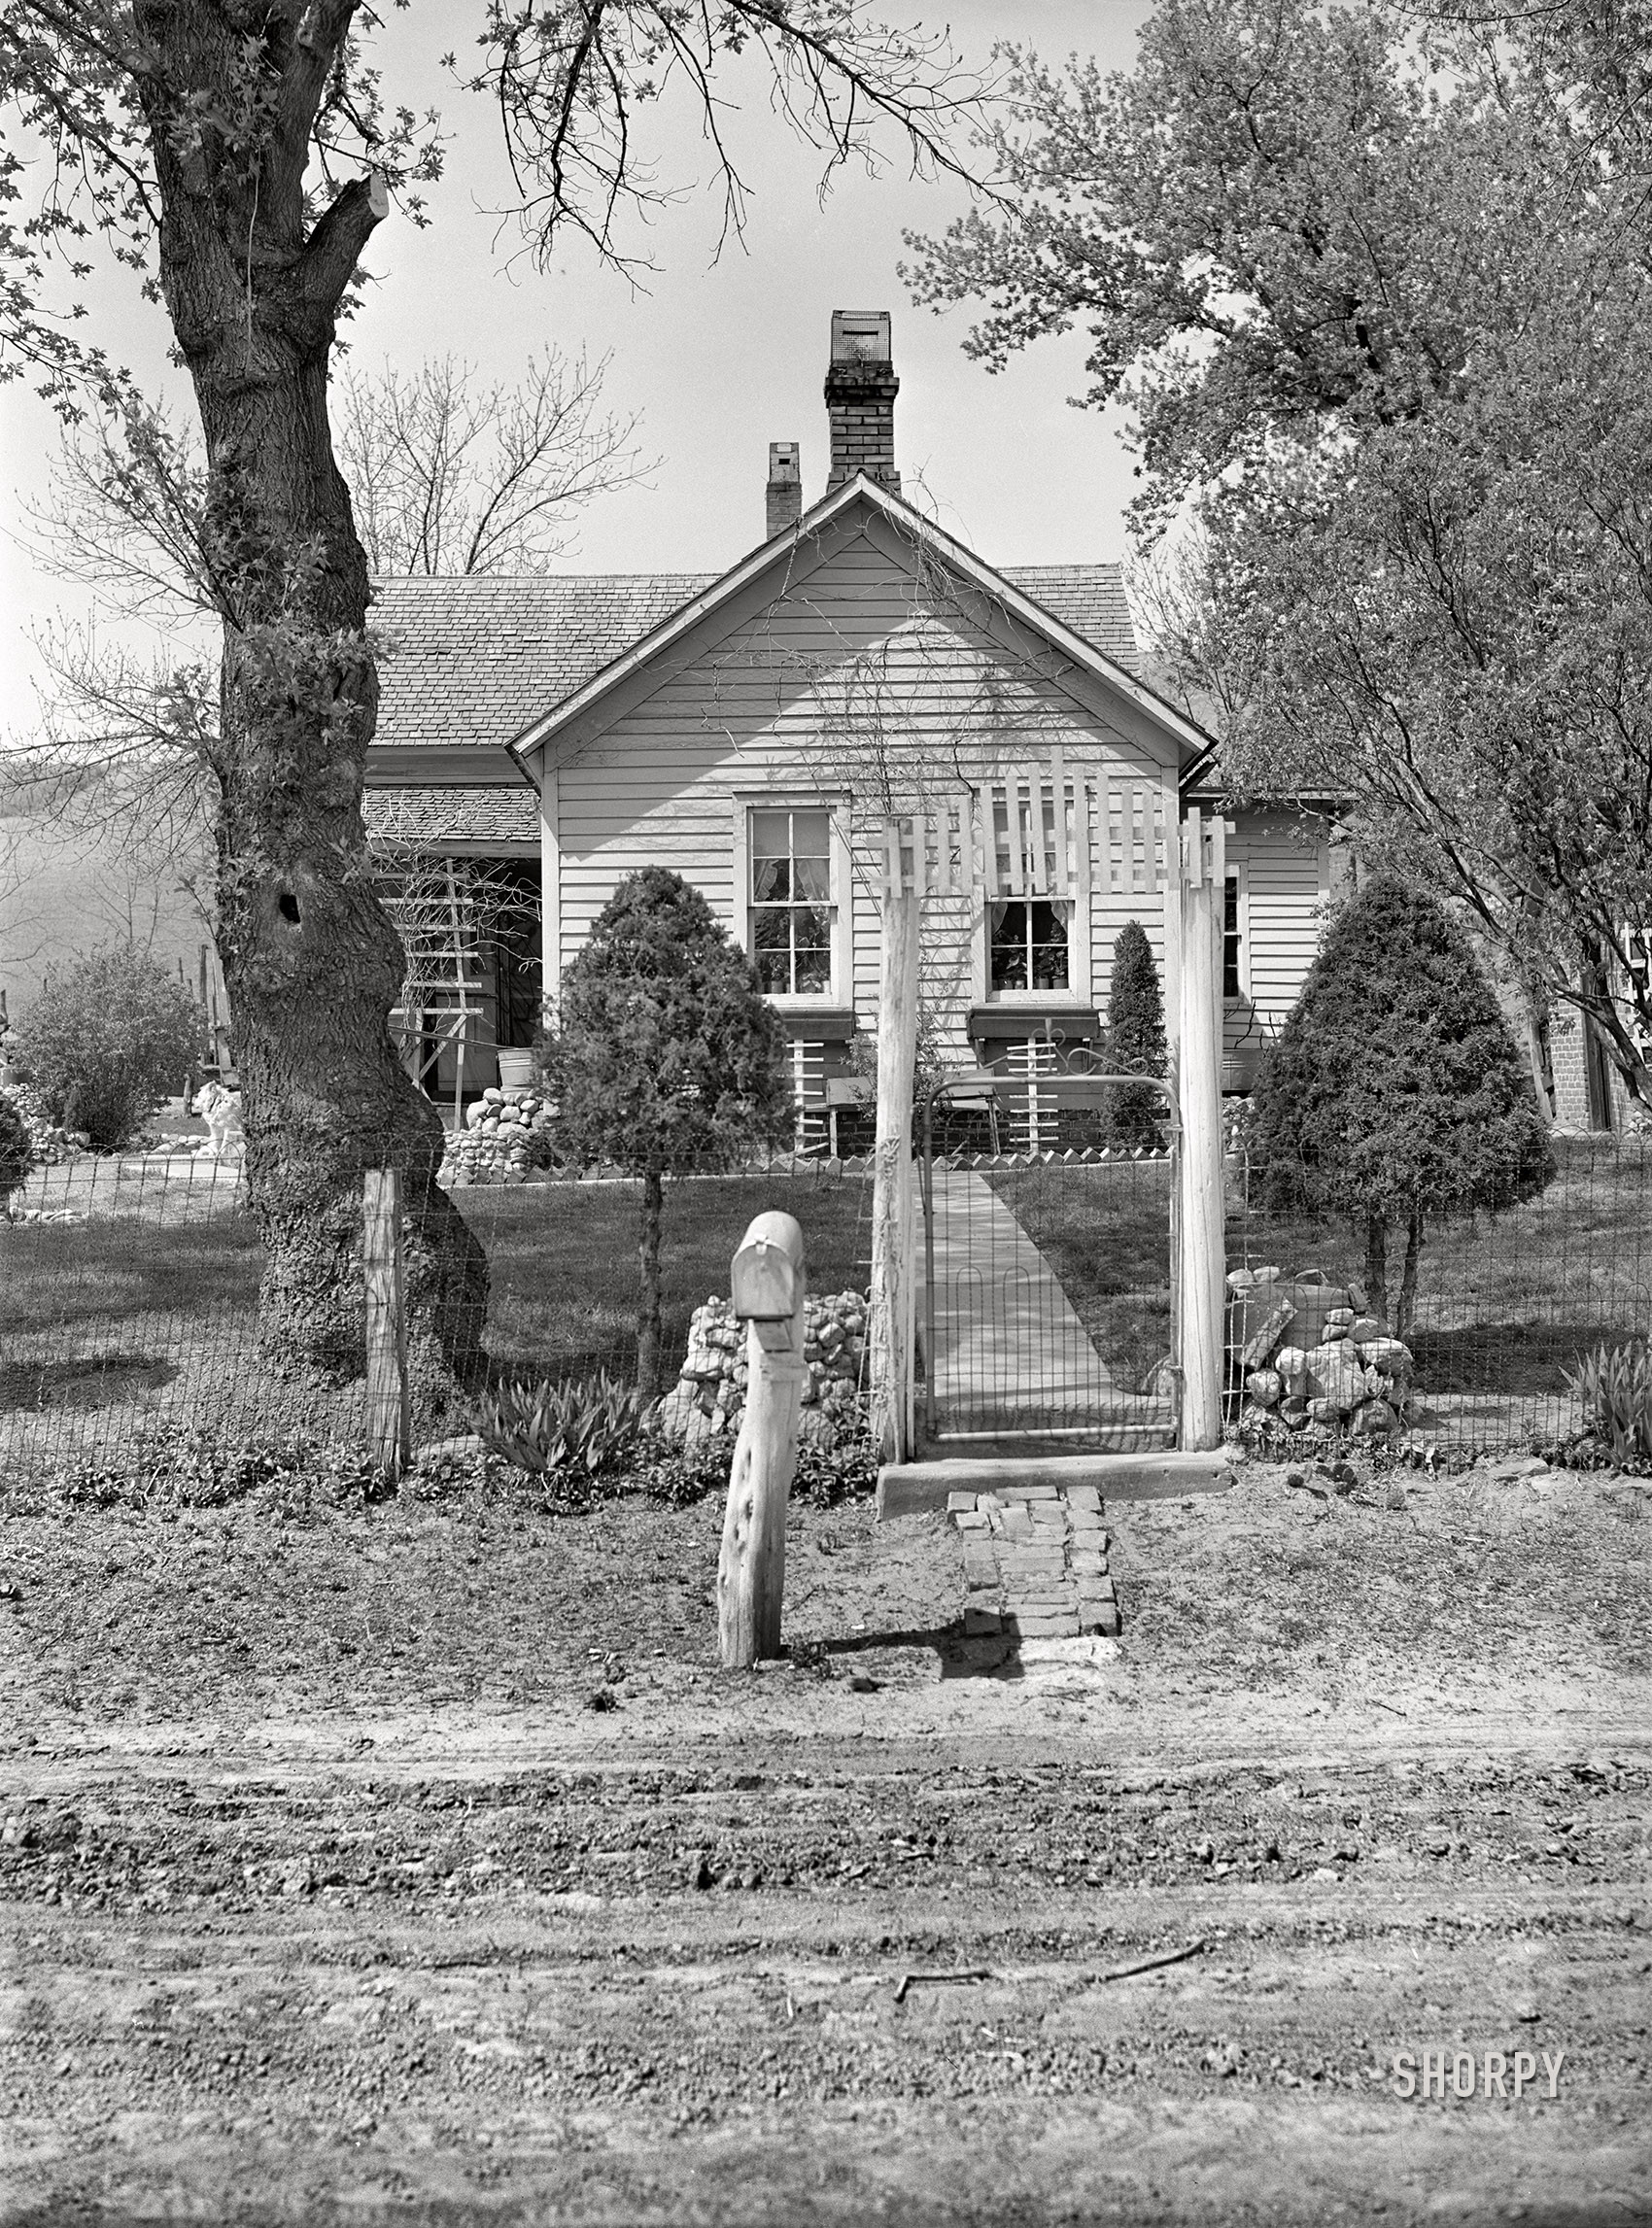 May 1940. "Danish farm home. Monona County, Iowa." Medium format acetate negative by John Vachon for the Resettlement Administration. View full size.